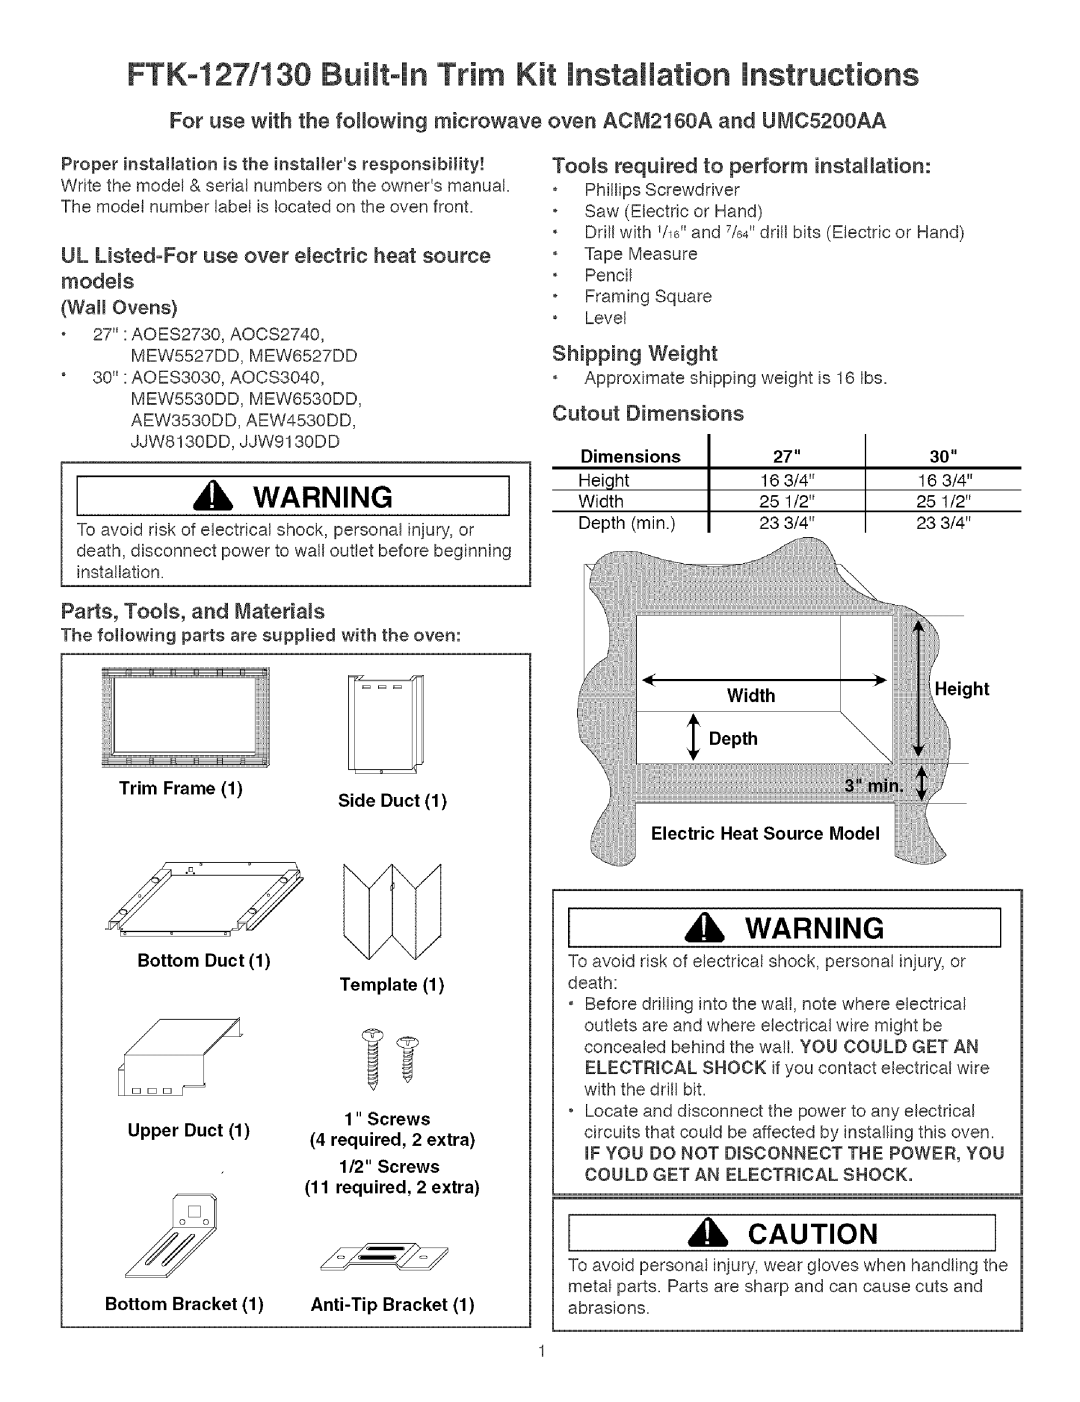 Sears FTK-127, FTK-130 dimensions Warningi, I A Warning, For use with the following microwave, oven ACM2160A and UMC5200AA 